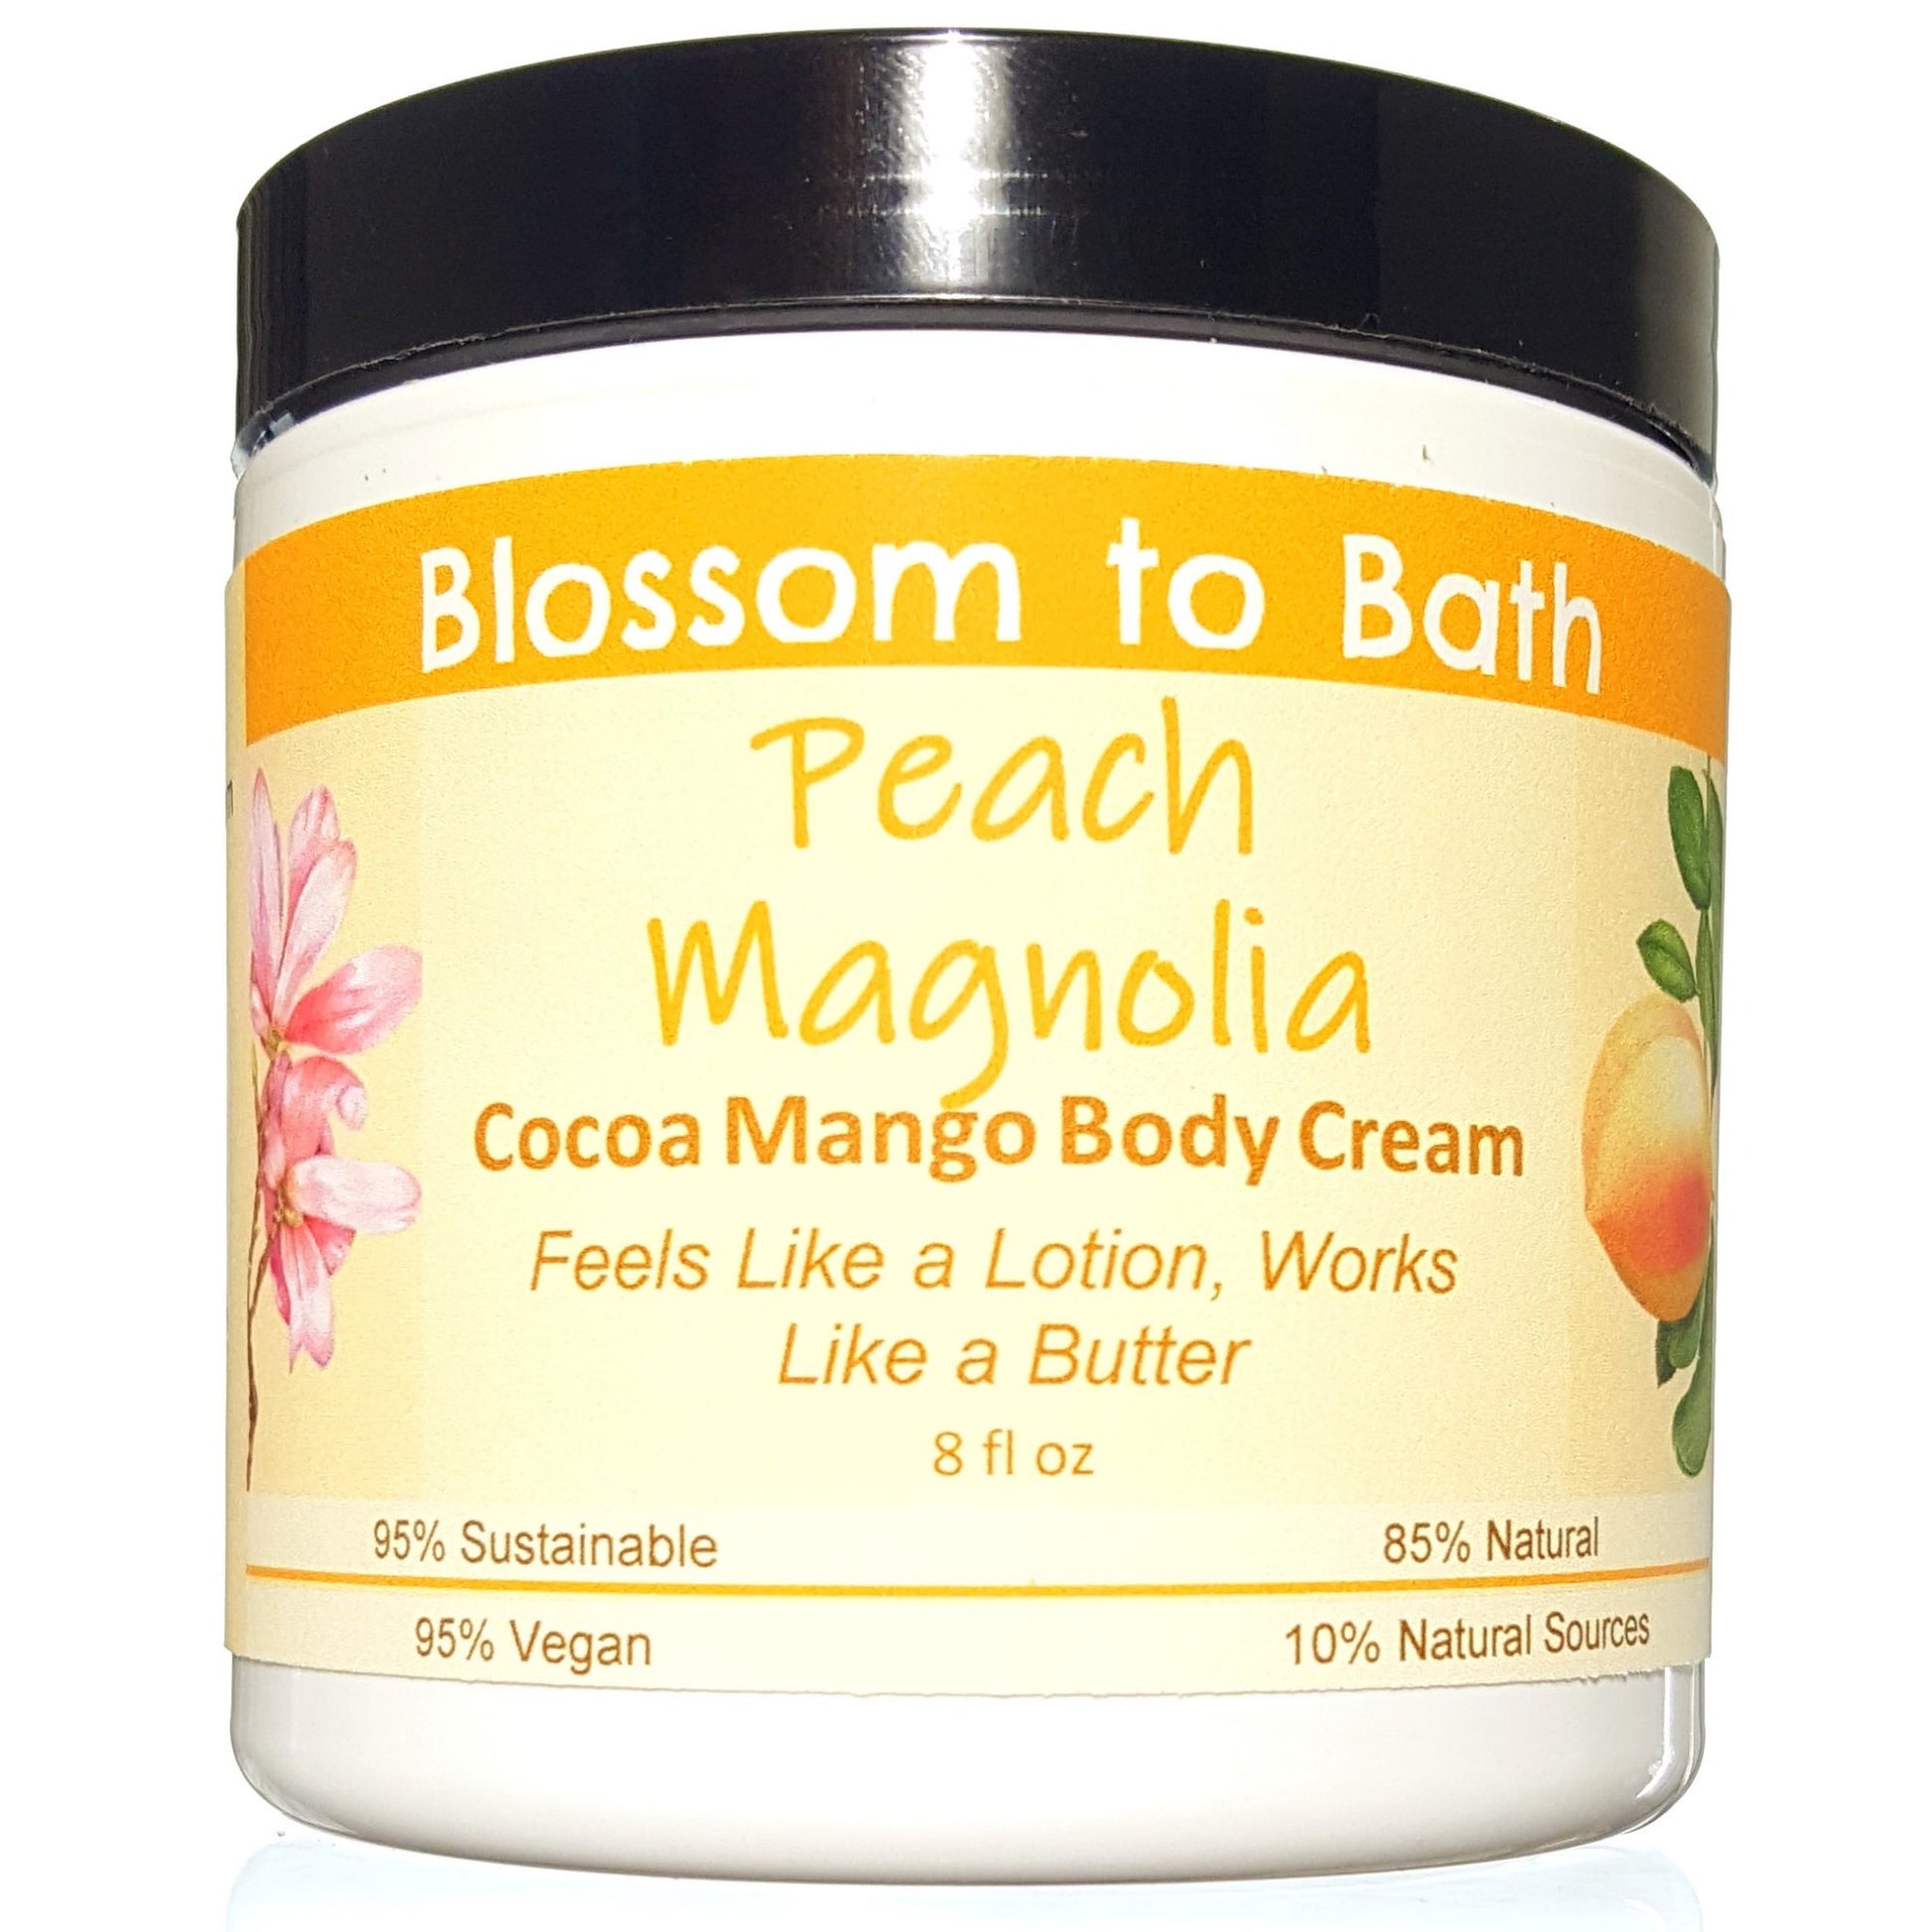 Buy Blossom to Bath Peach Magnolia Cocoa Mango Body Cream from Flowersong Soap Studio.  Rich organic butters  soften and moisturize even the roughest skin all day  An intoxicating blend of peach, magnolia, and raspberry.